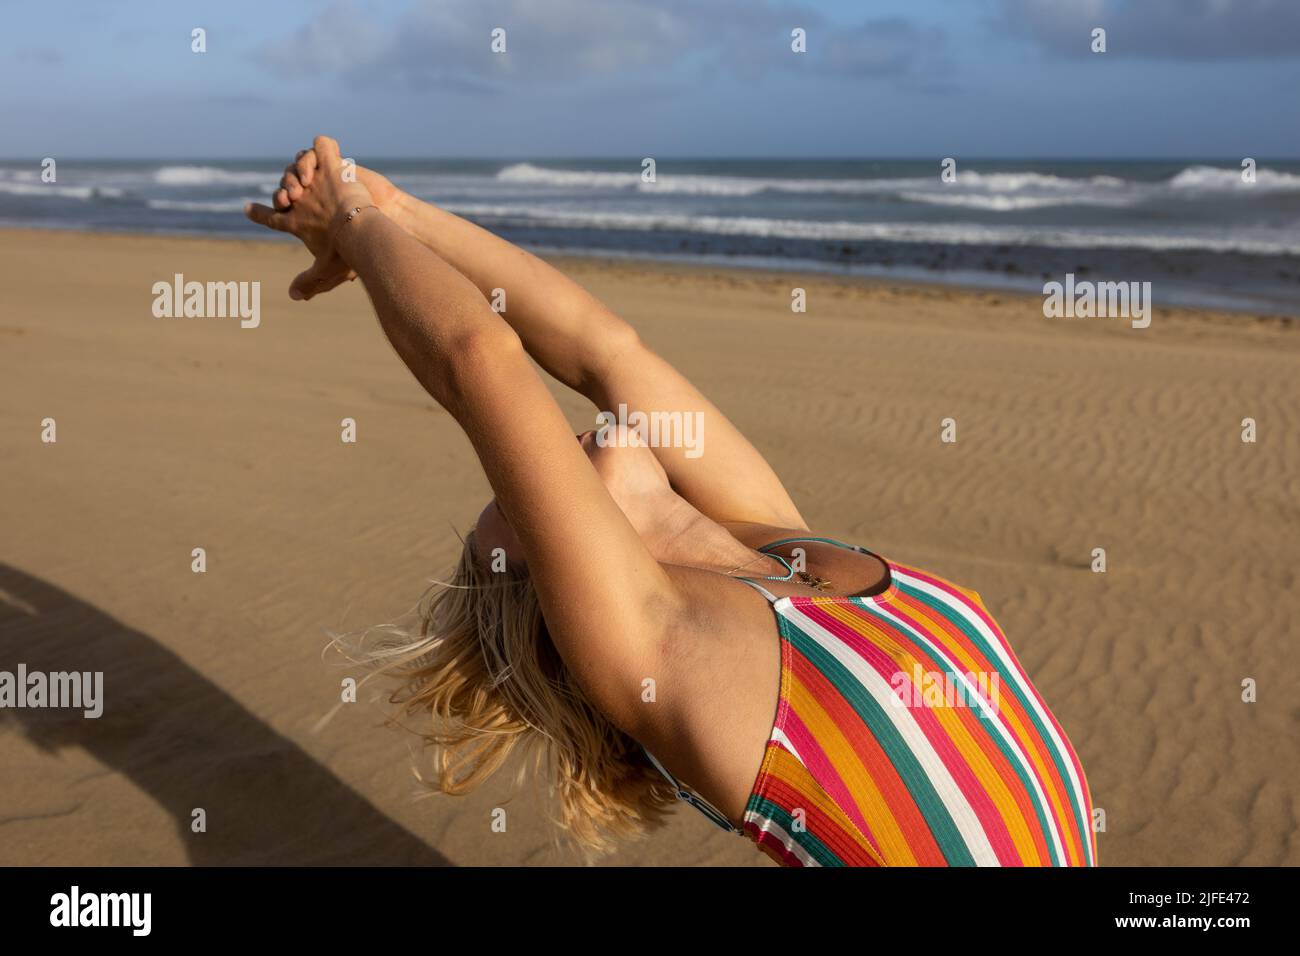 German woman performing stretching exercises on the beach. Stock Photo